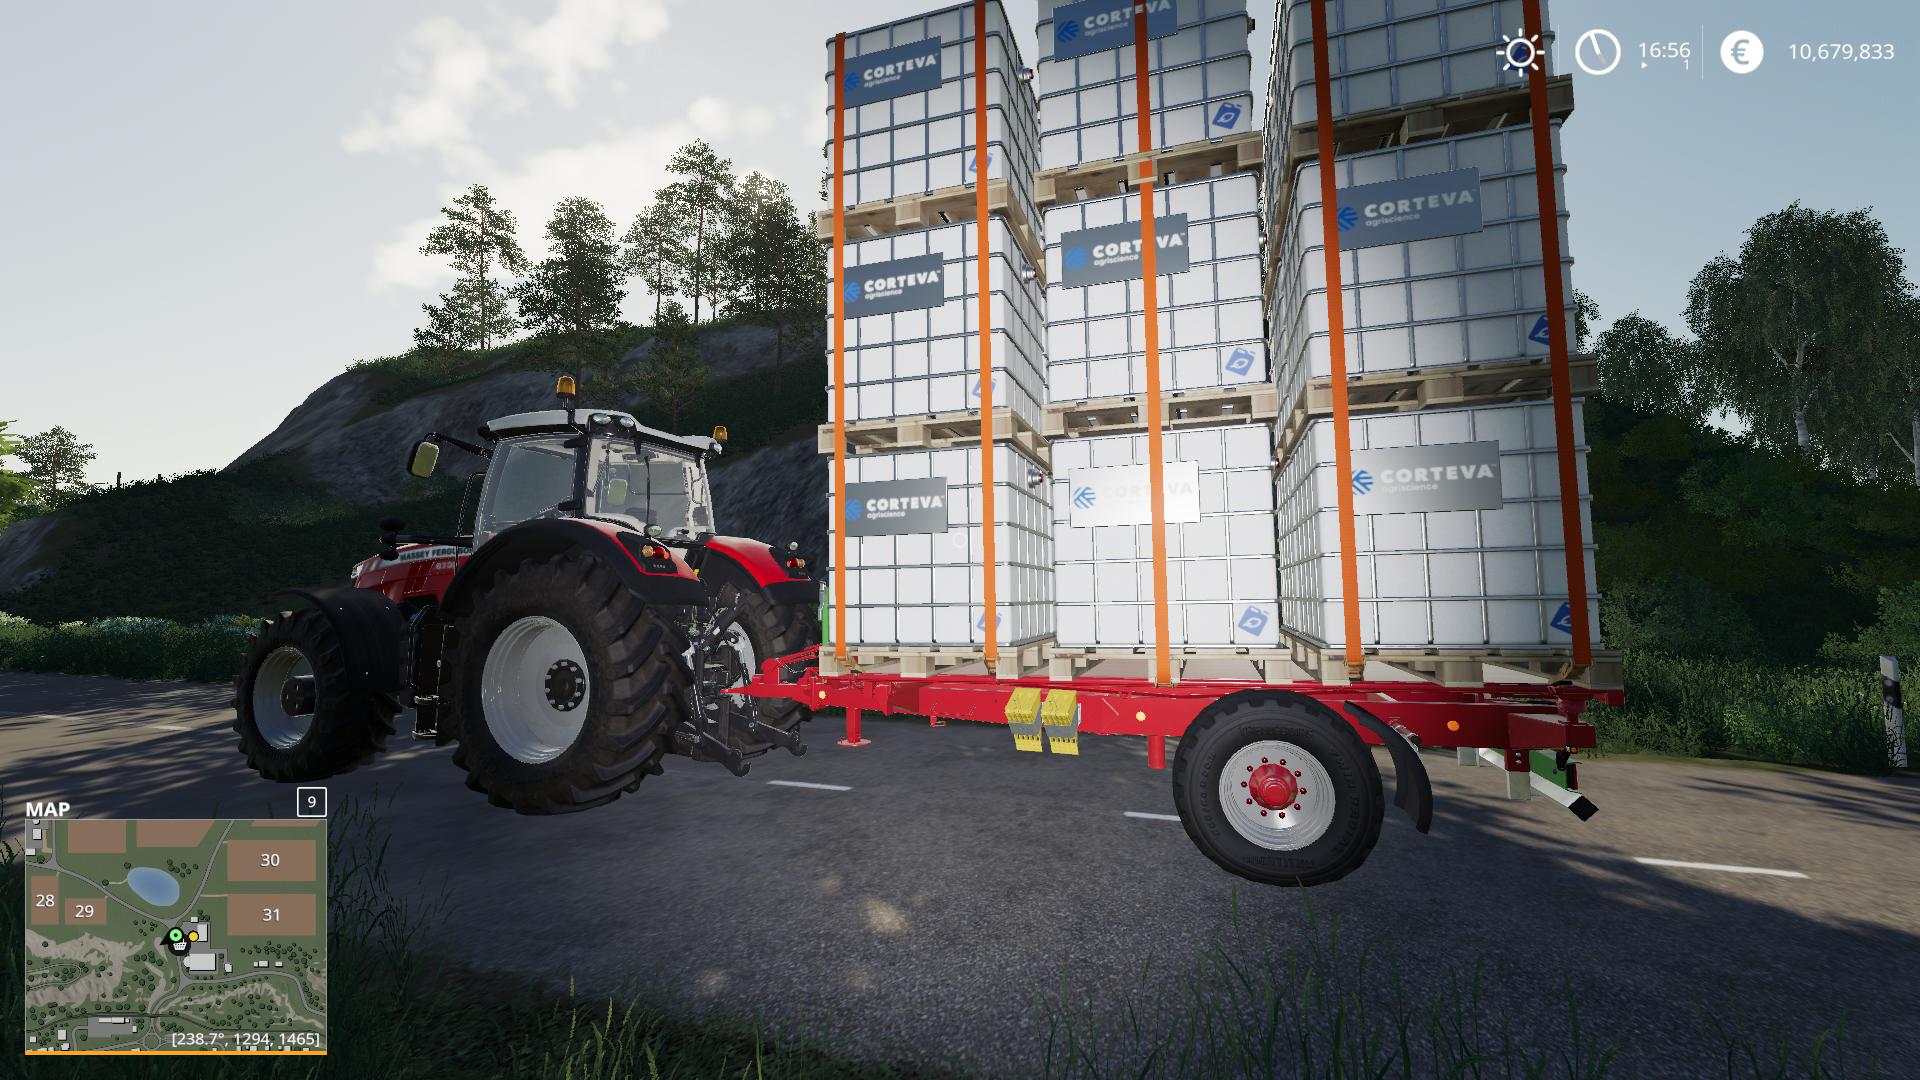 Trailer Autoload Pack With 3 Tiers Of Pallet Loading 1000 Farming Simulator 22 Mod Ls22 2185